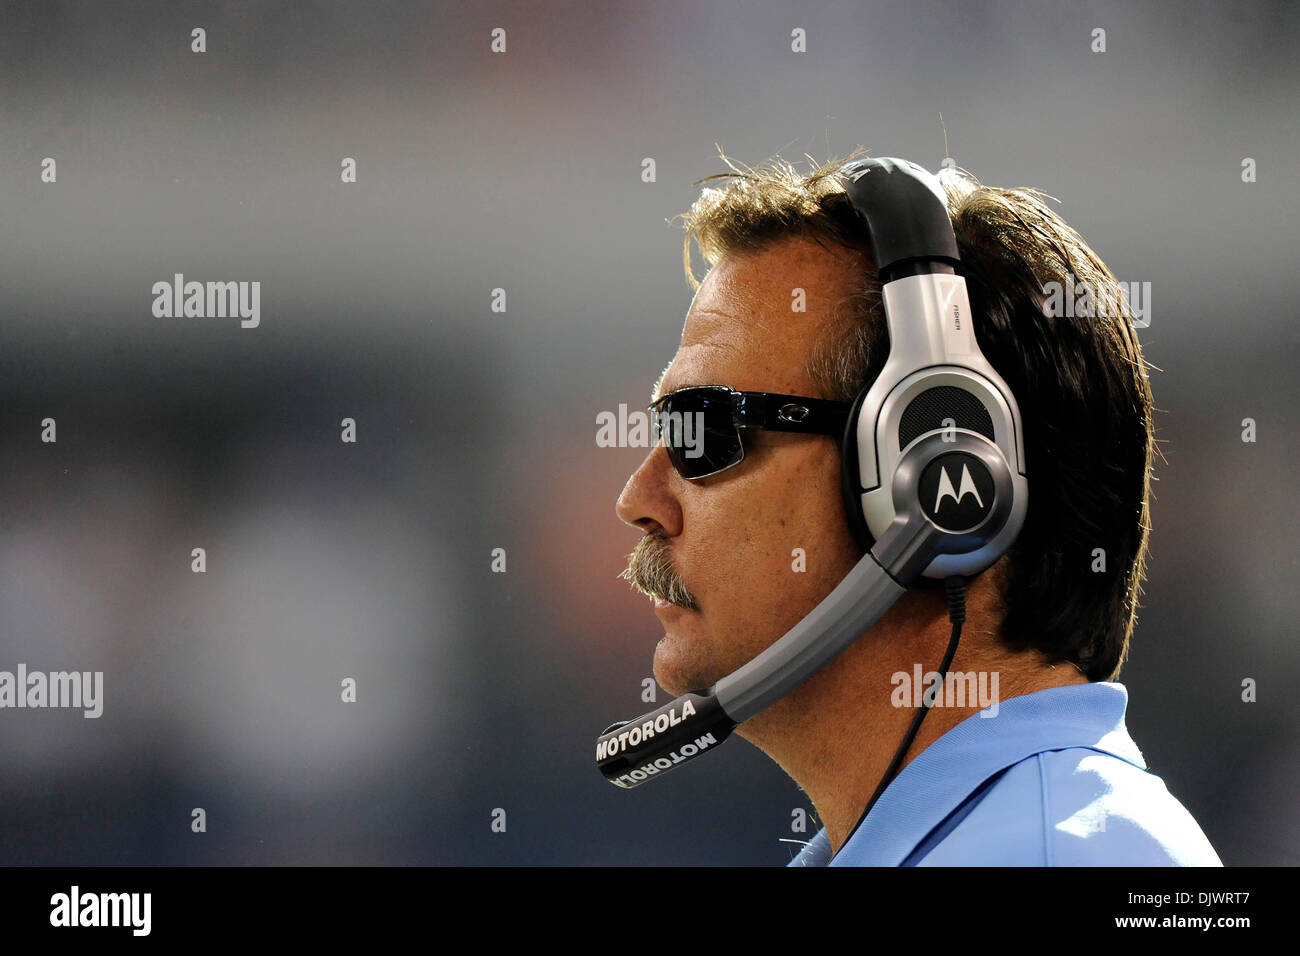 Oct. 10, 2010 - Arlington, Texas, United States of America - Tennessee's Head Coach Jeff Fisher in 2nd half action as the Cowboy fall to the Tennessee Titans 34-27 at Cowboys Stadium in Arlington, Texas. (Credit Image: © Steven Leija/Southcreek Global/ZUMApress.com) Stock Photo